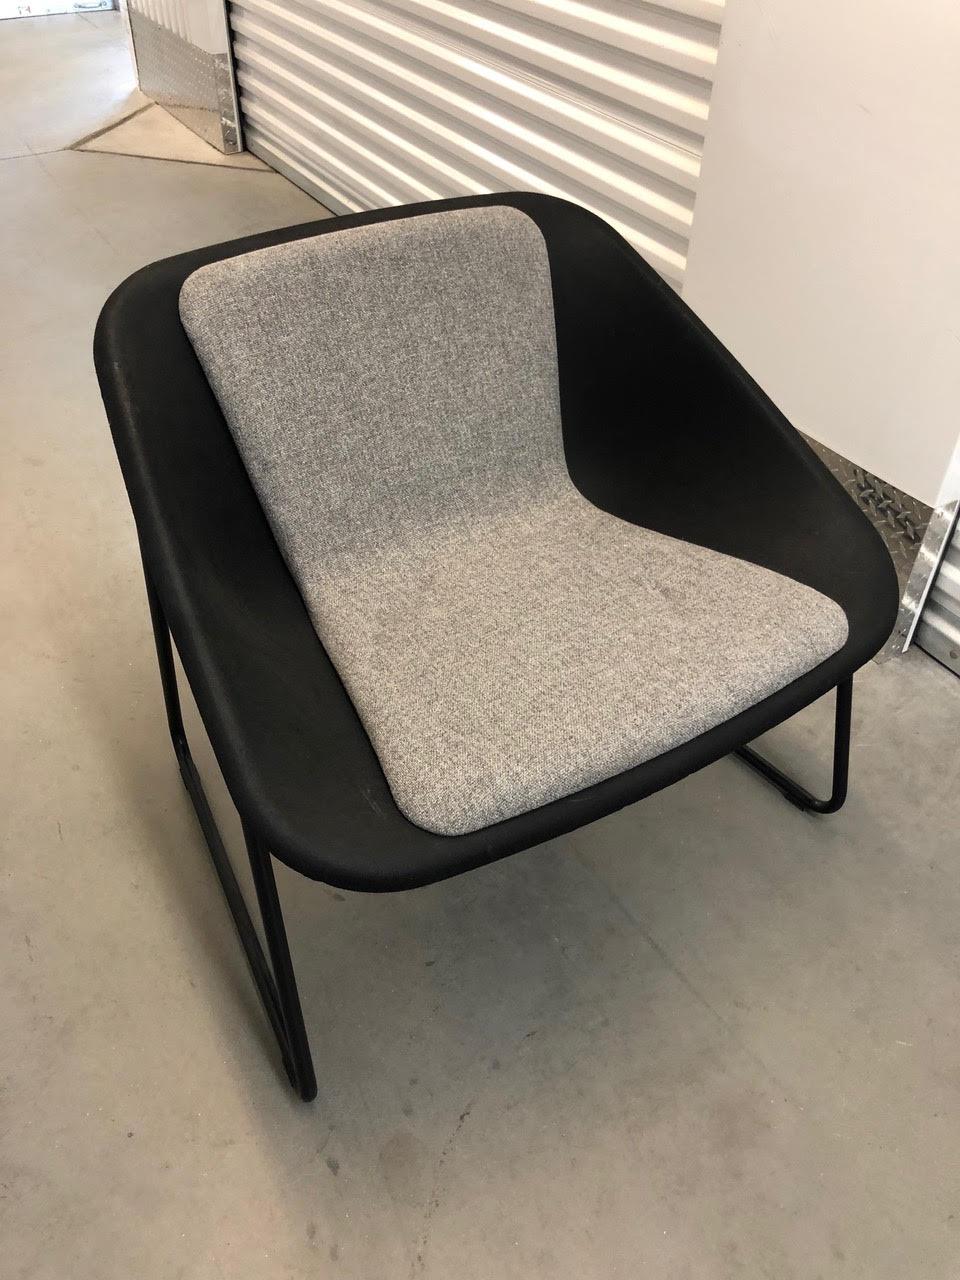 Kola Light is a casual meeting or dining chair. Kola is aesthetically and weight wise a light chair making it fit both public and private modern interiors. The seat, manufactured of 100% recyclable polyester felt, is part of the supporting